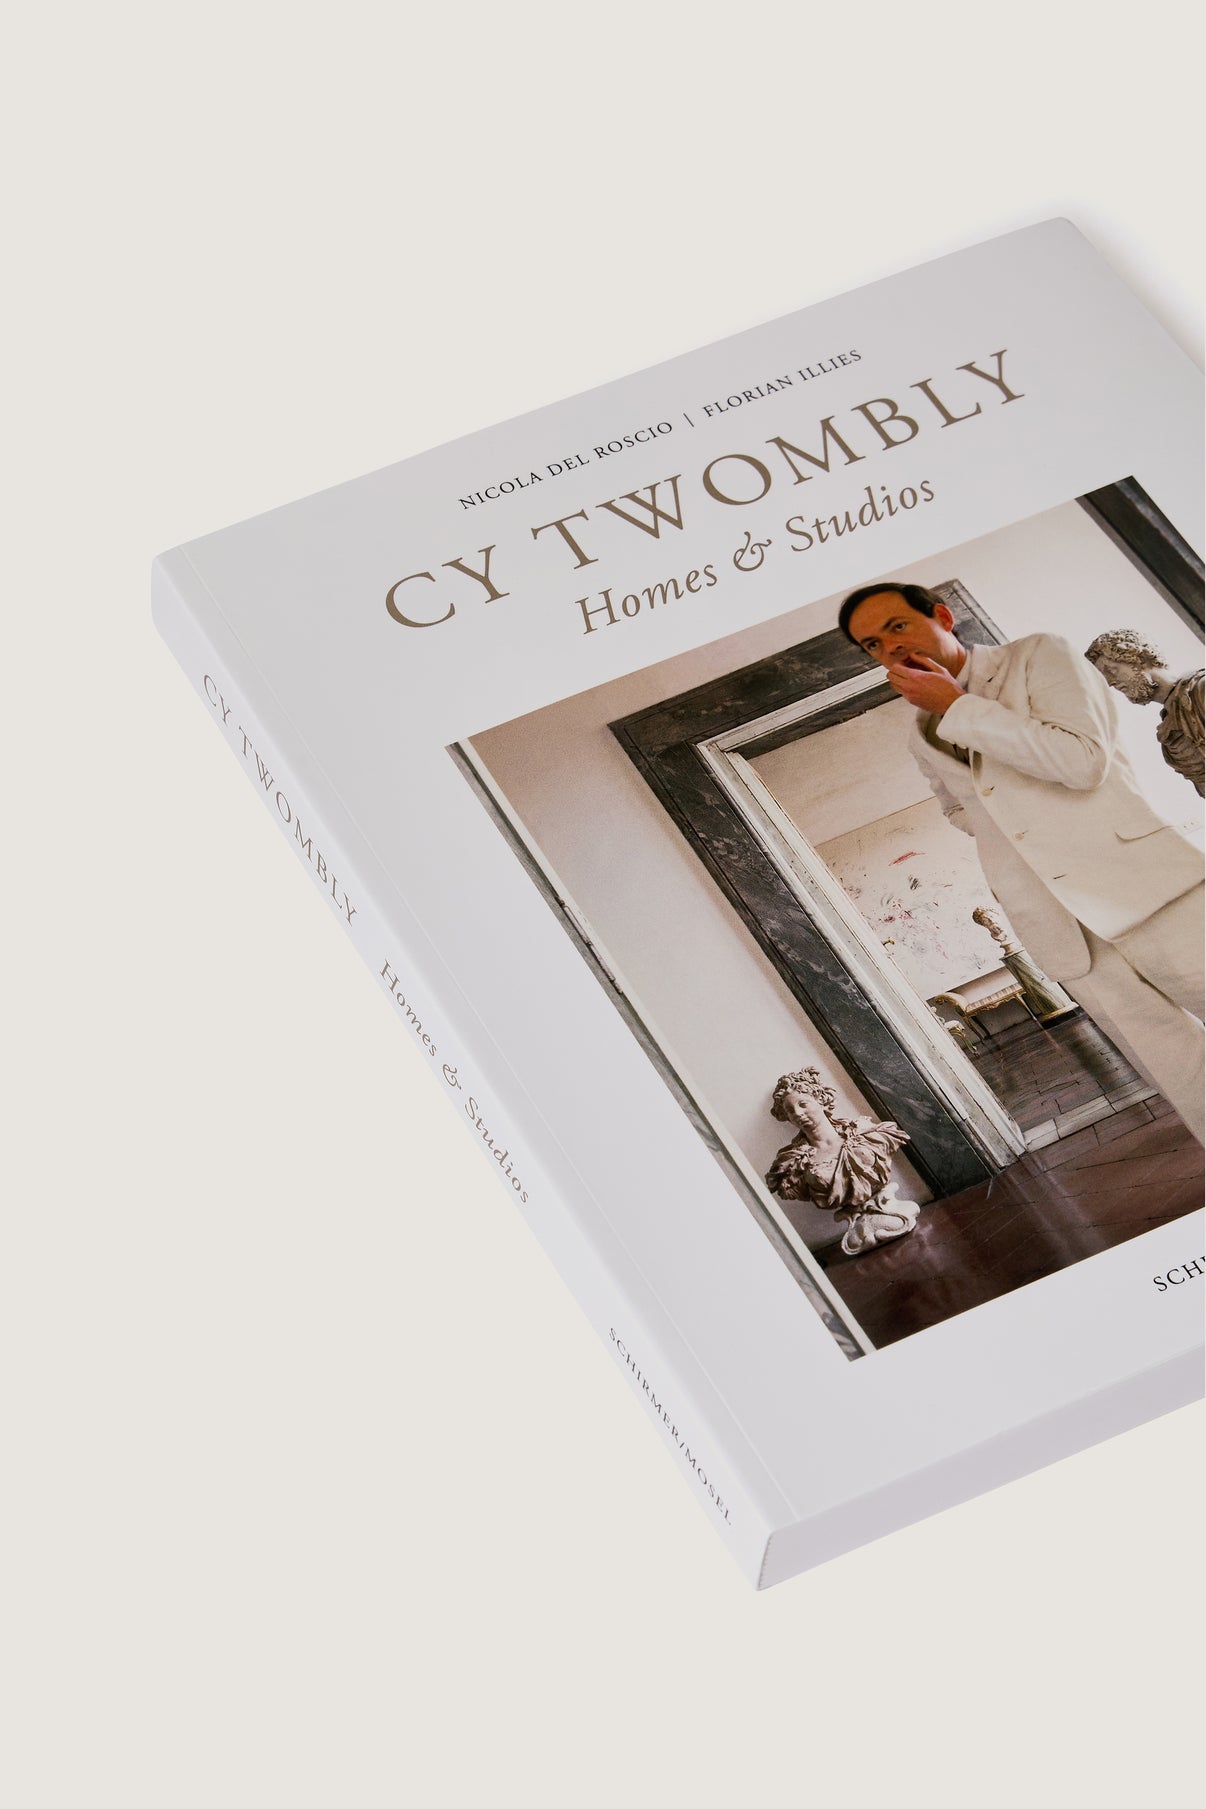 LIVRE "CY TWOMBLY, HOMES AND STUDIOS" vue 2